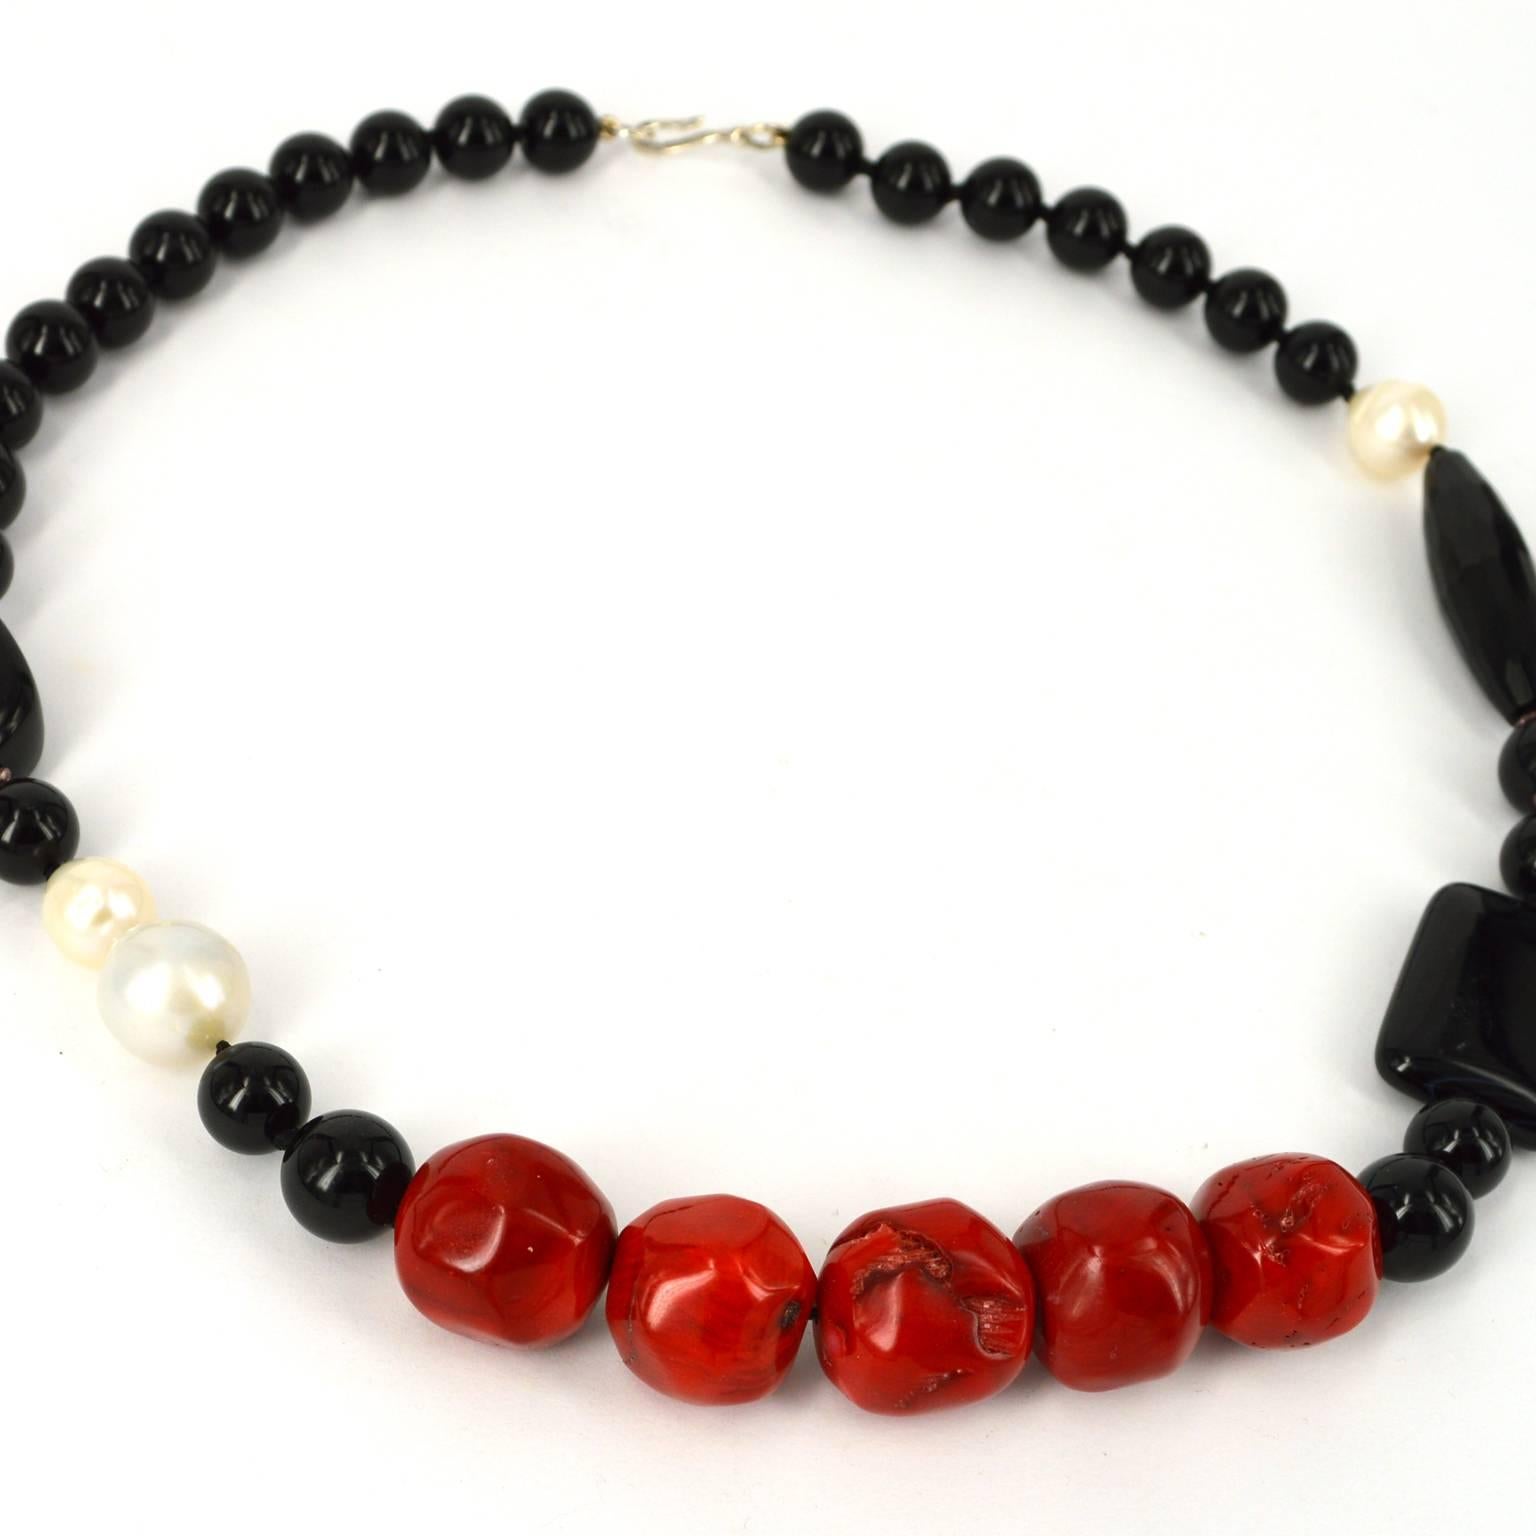 Black Onyx, Agate, Red Bamboo Coral and Freshwater Pearl Necklace 1